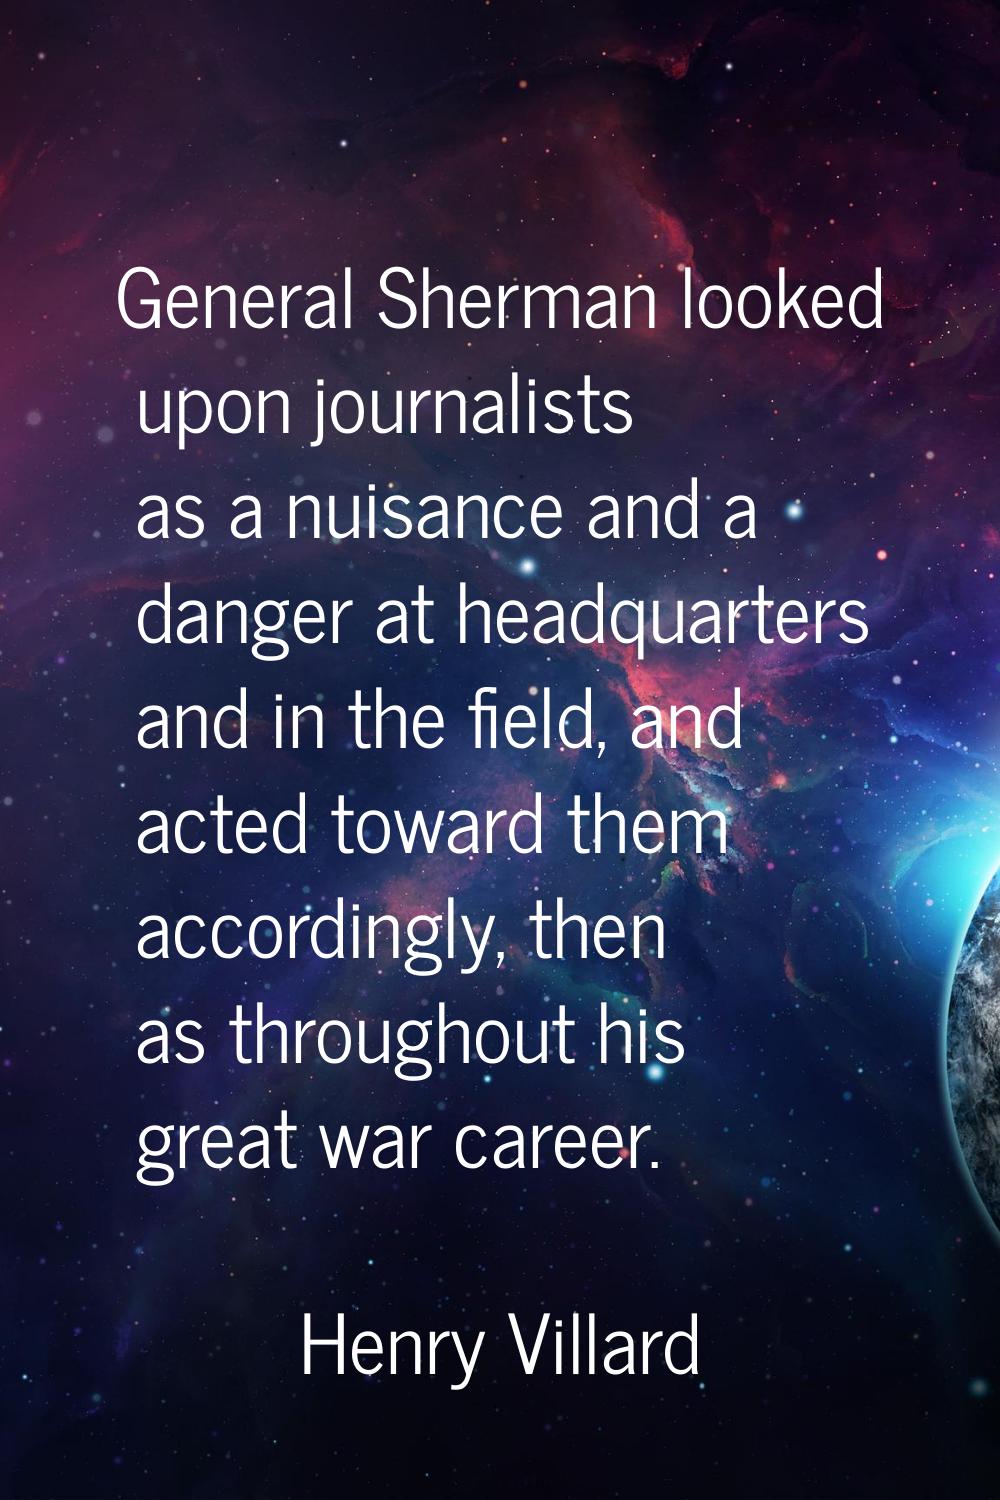 General Sherman looked upon journalists as a nuisance and a danger at headquarters and in the field